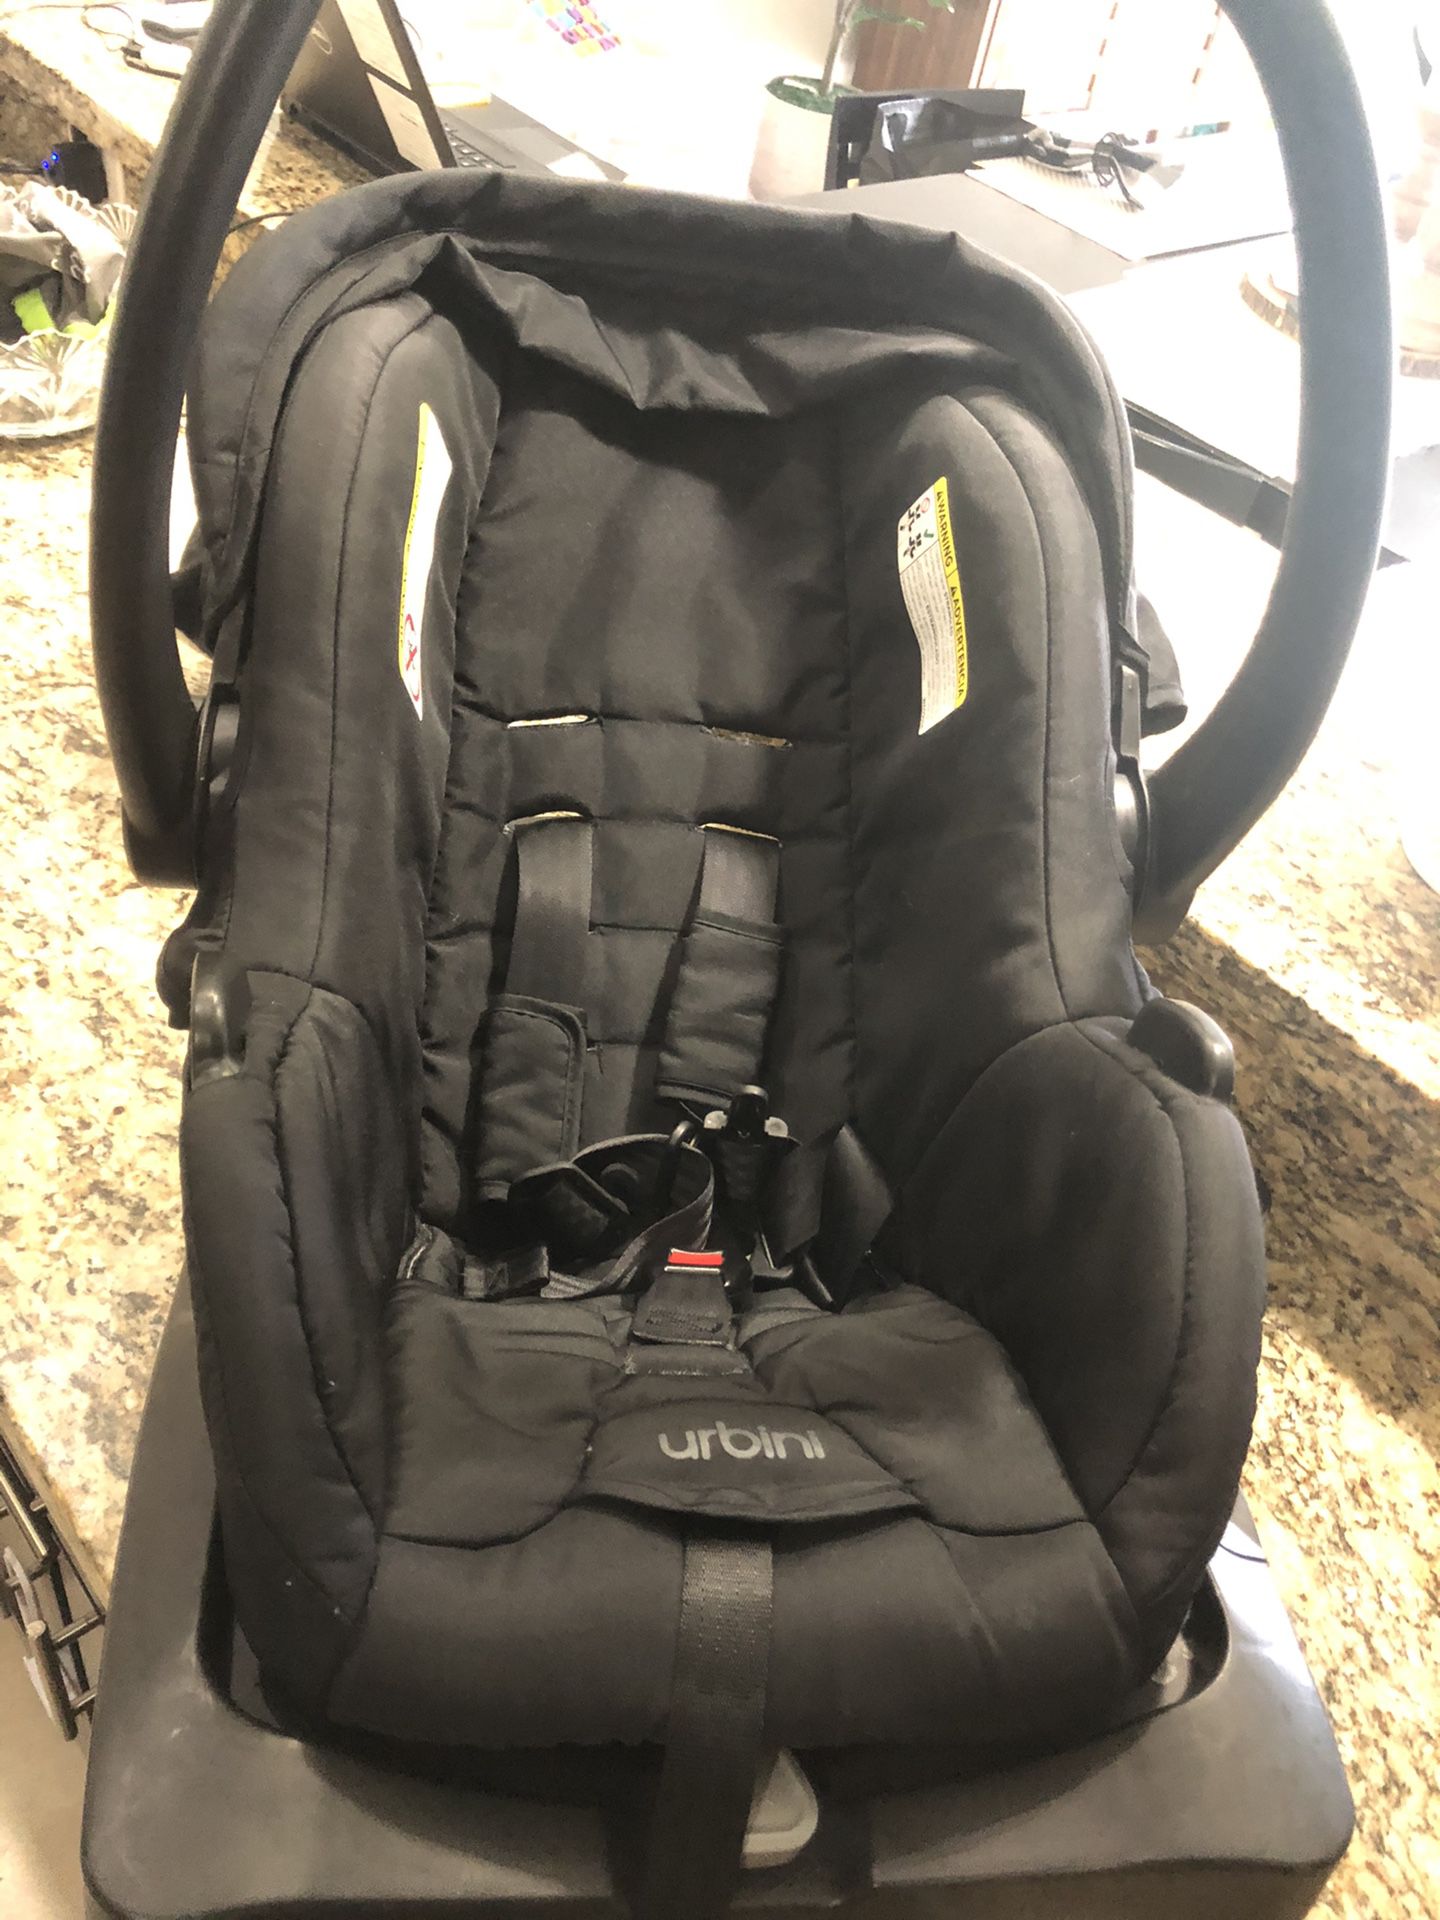 Baby Car Seat with Stroller